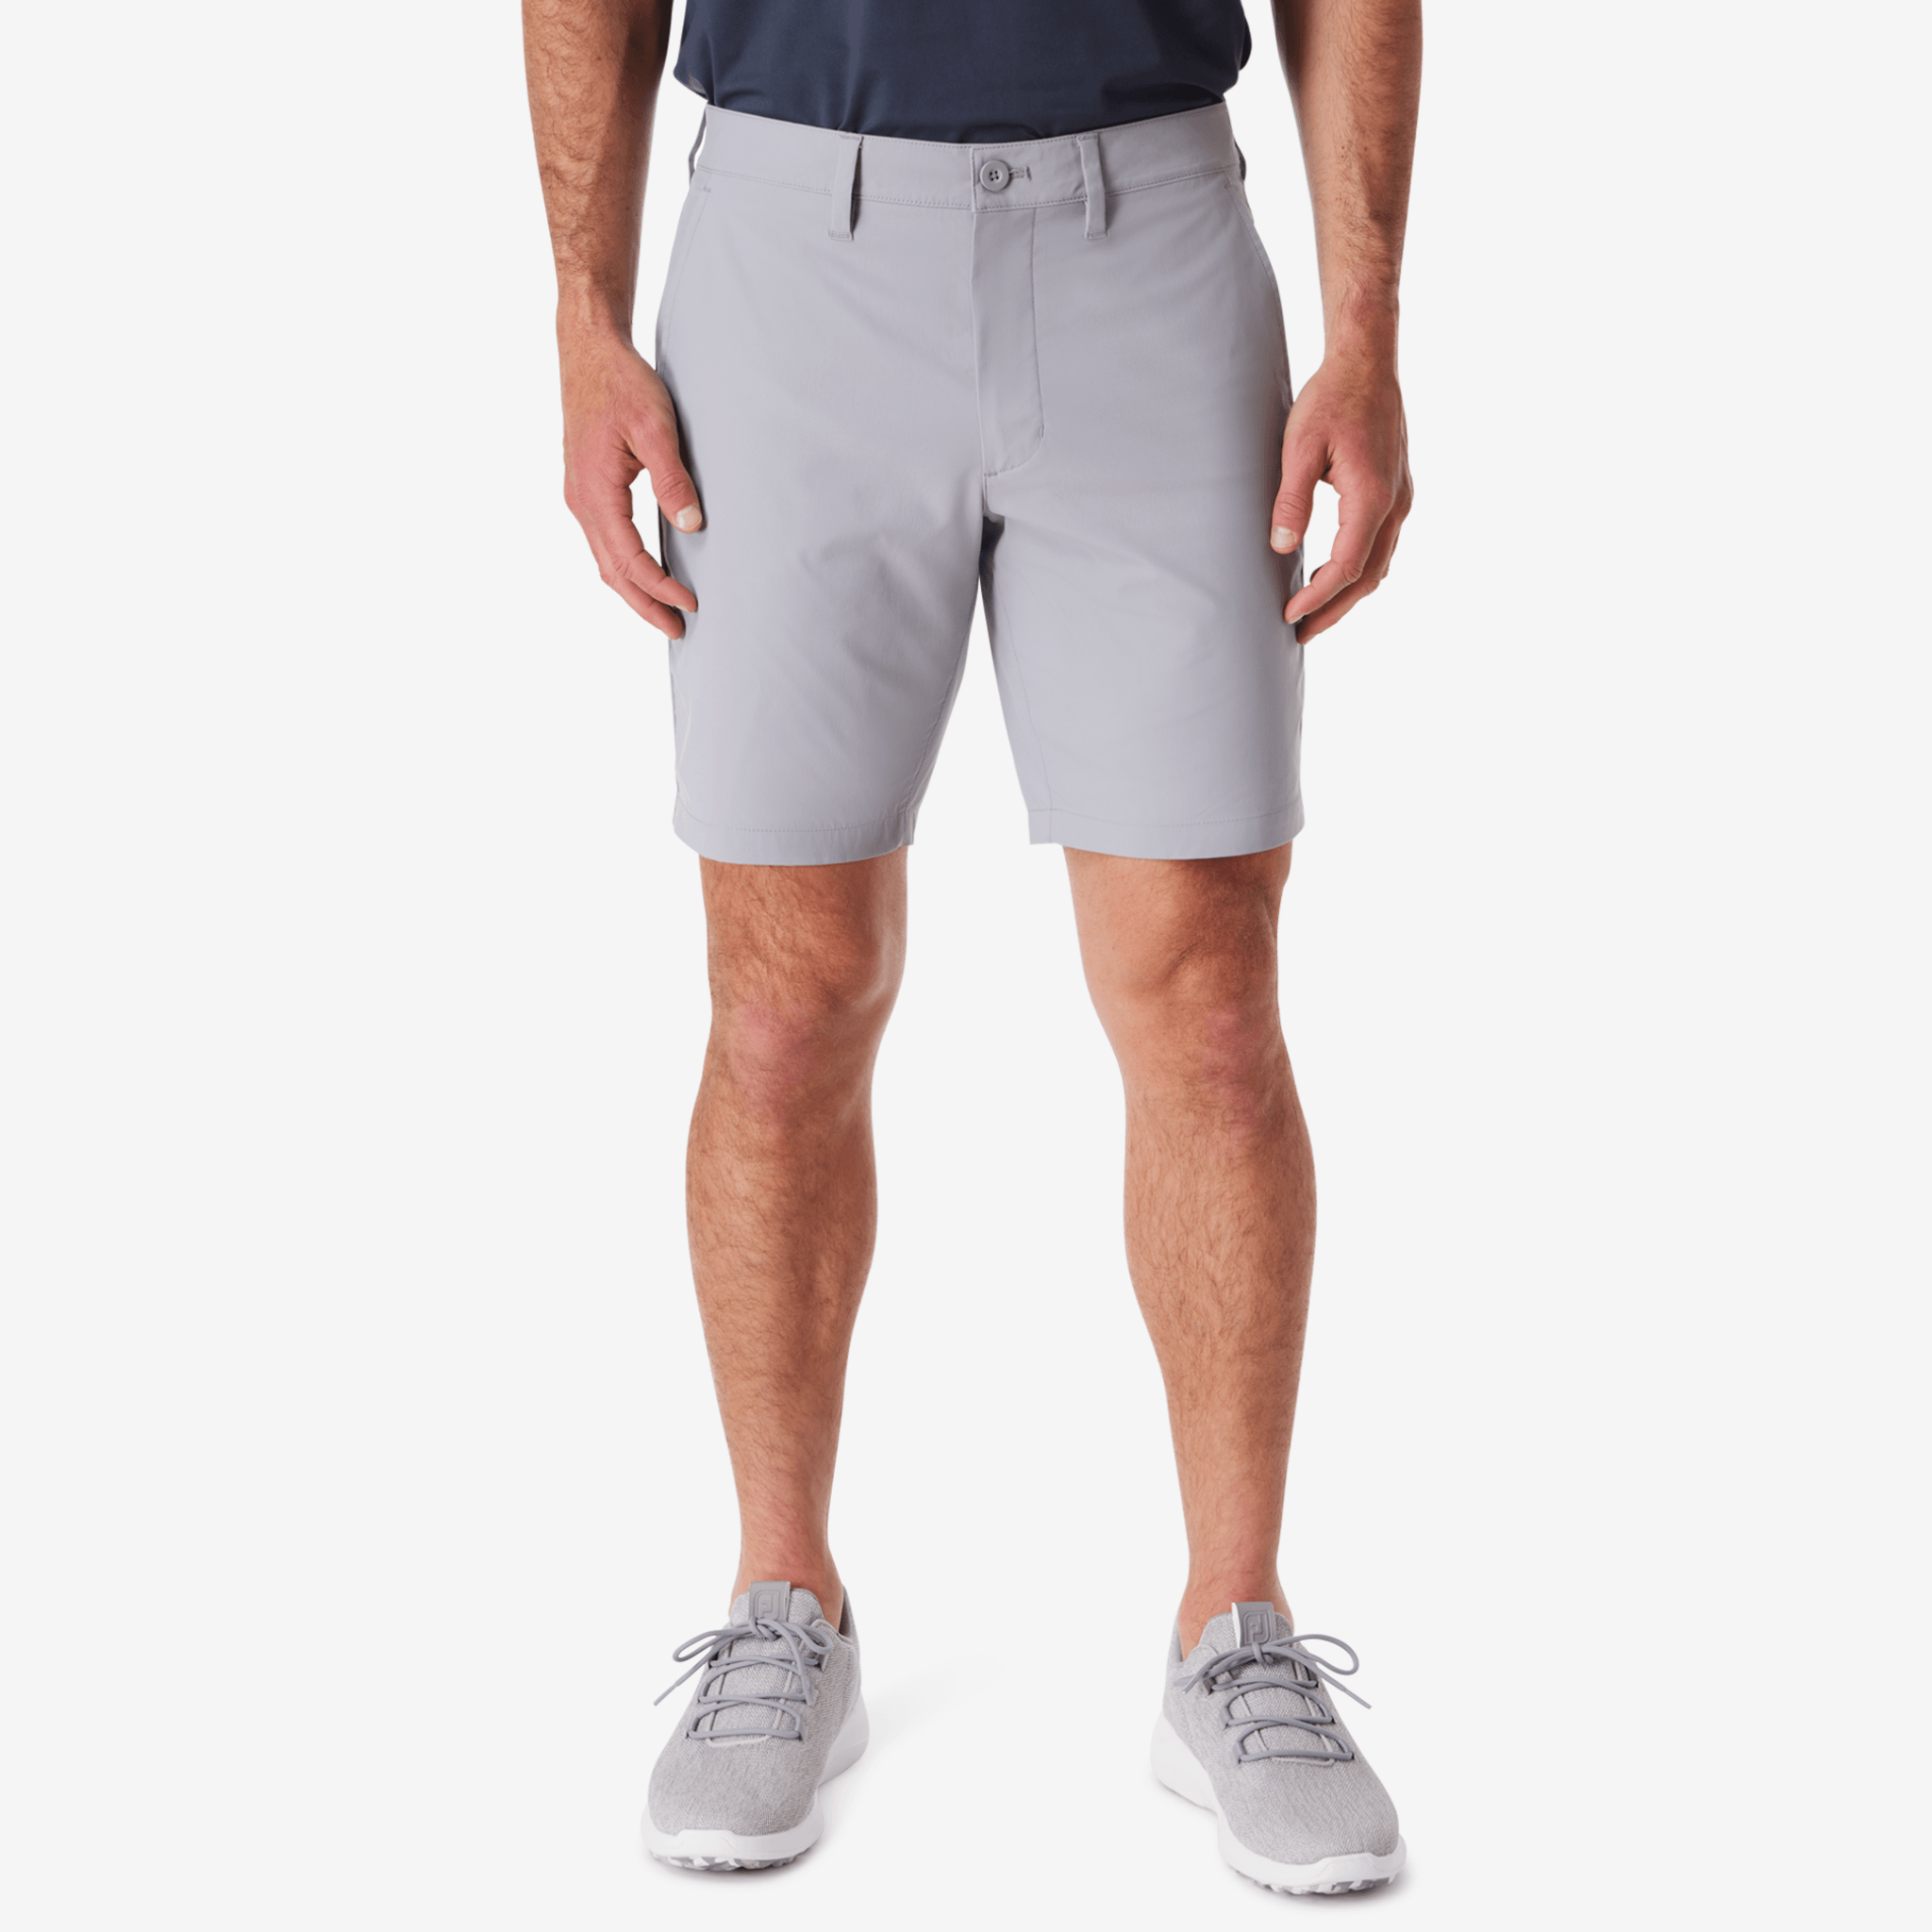 Clubhouse short Gray 34 - Greatness Wins Gray